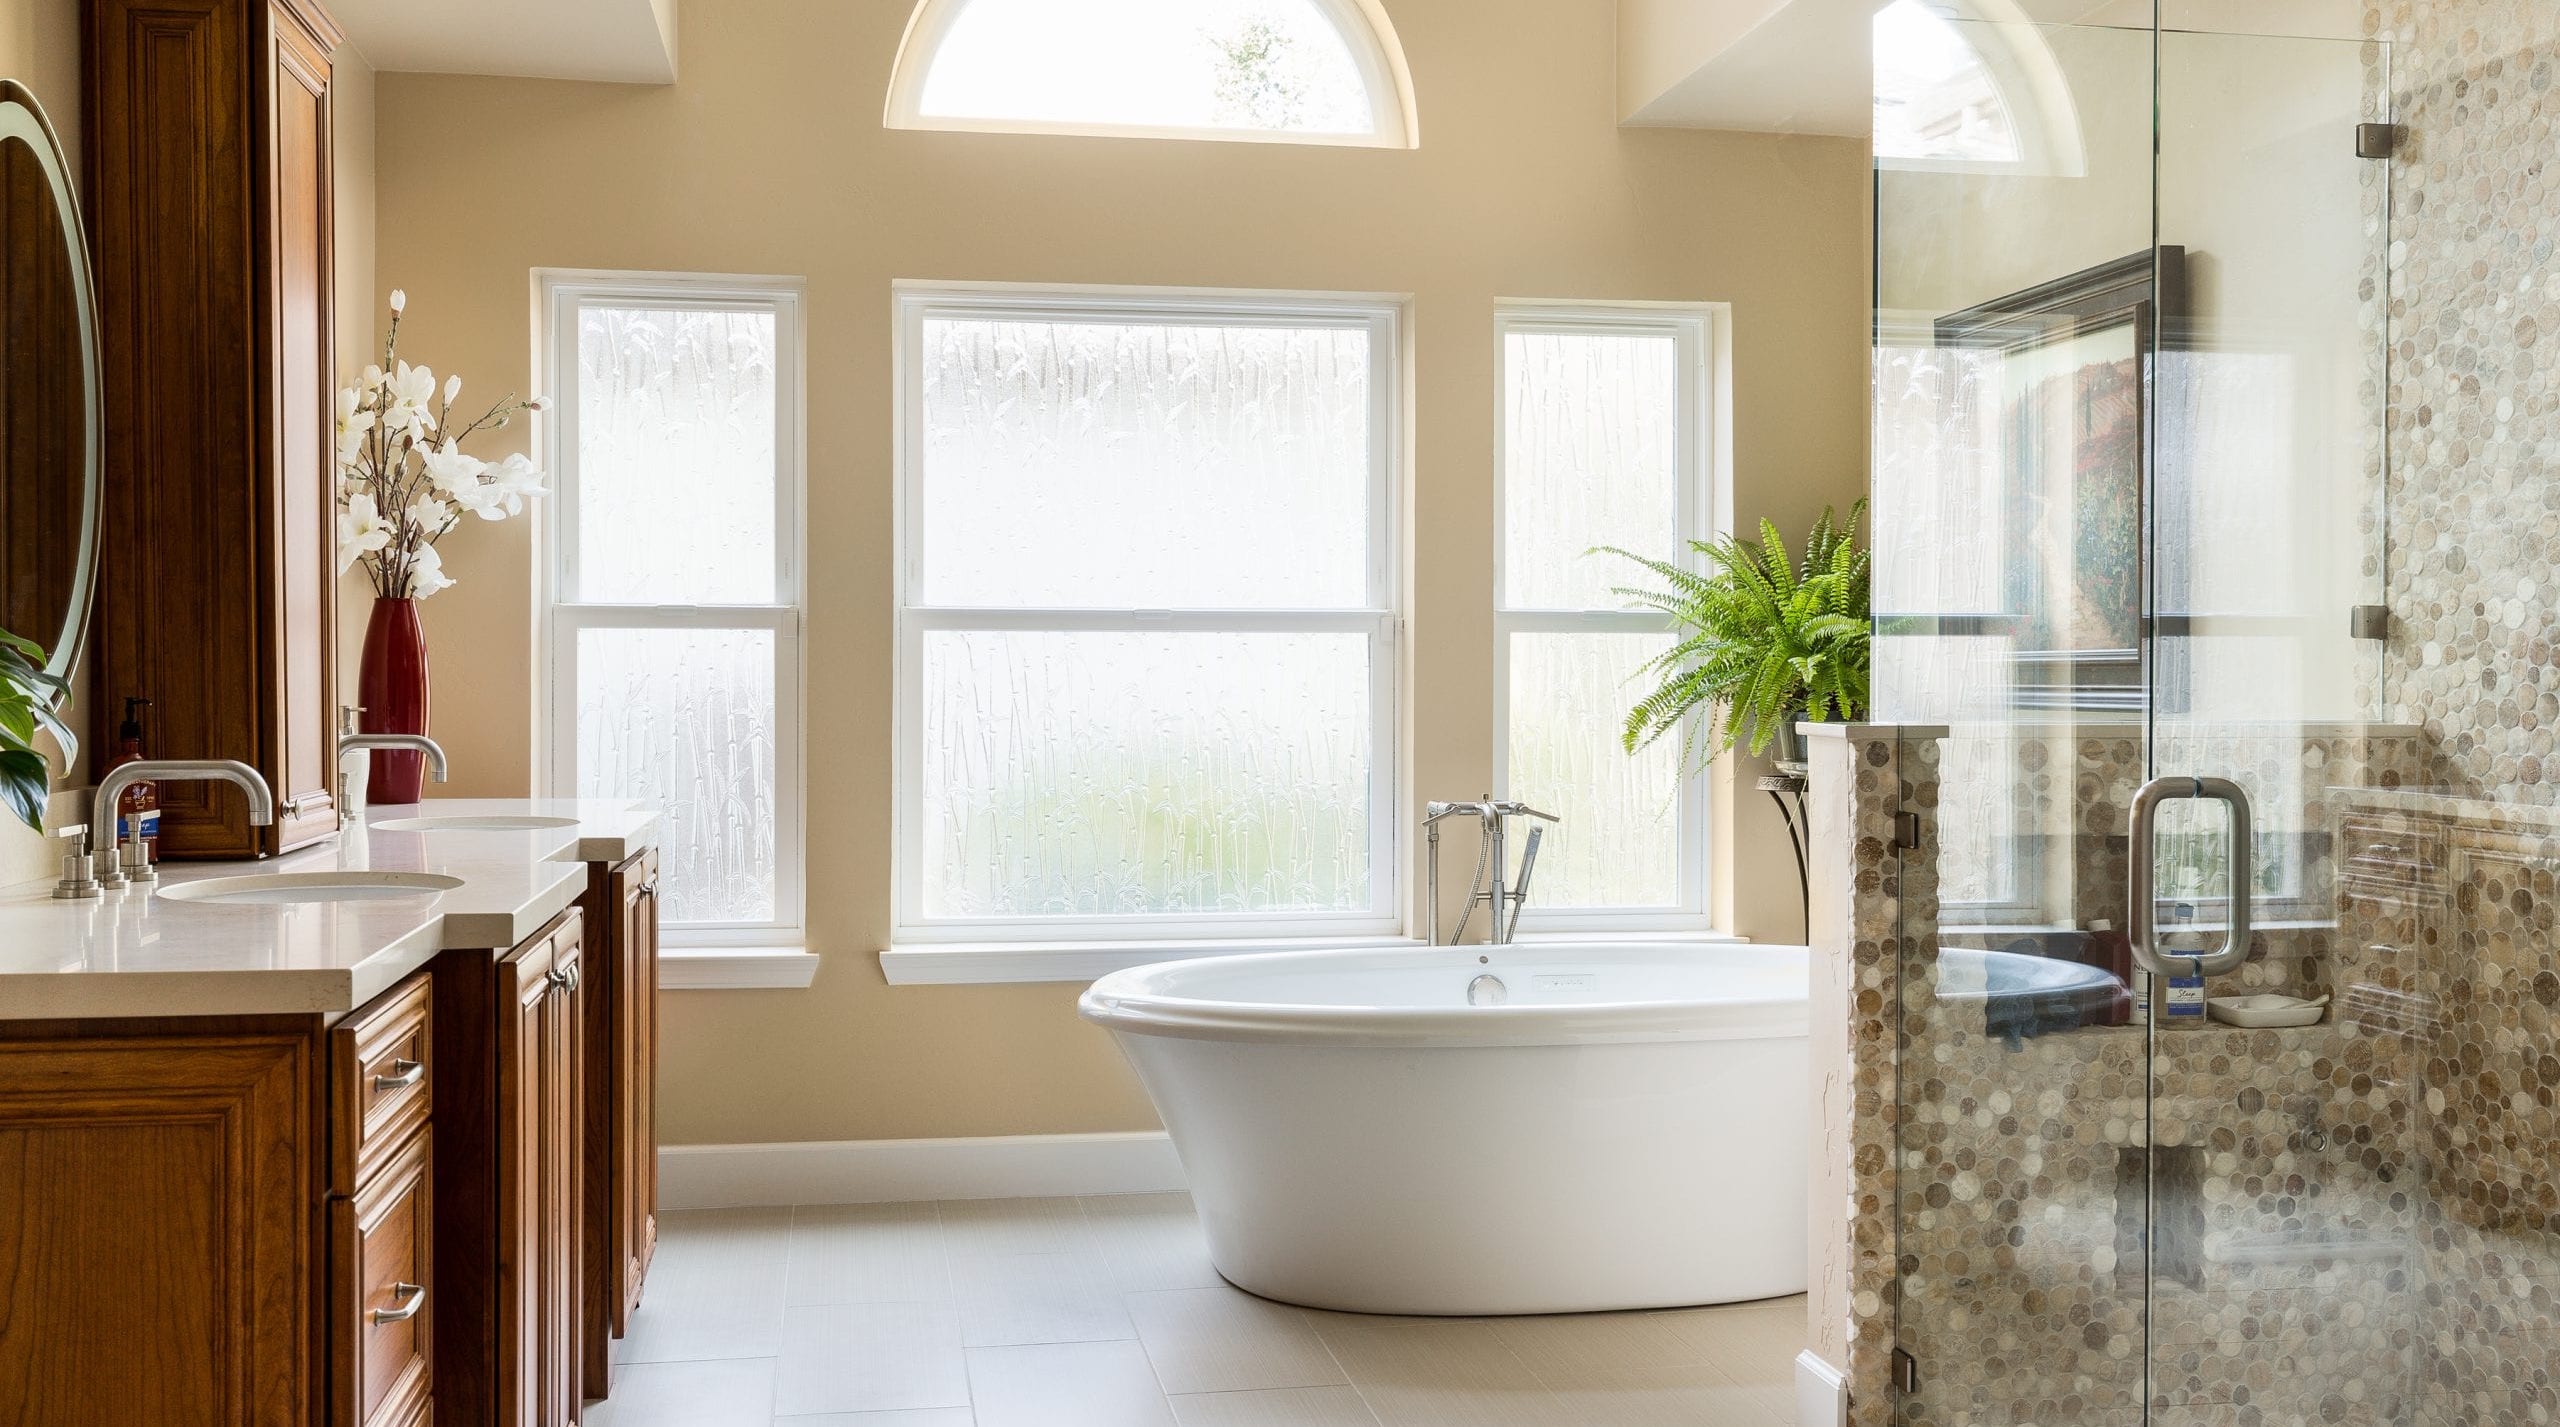 Stand alone tub in very open bathroom with 4 large windows allowing natural light to pour into the space.